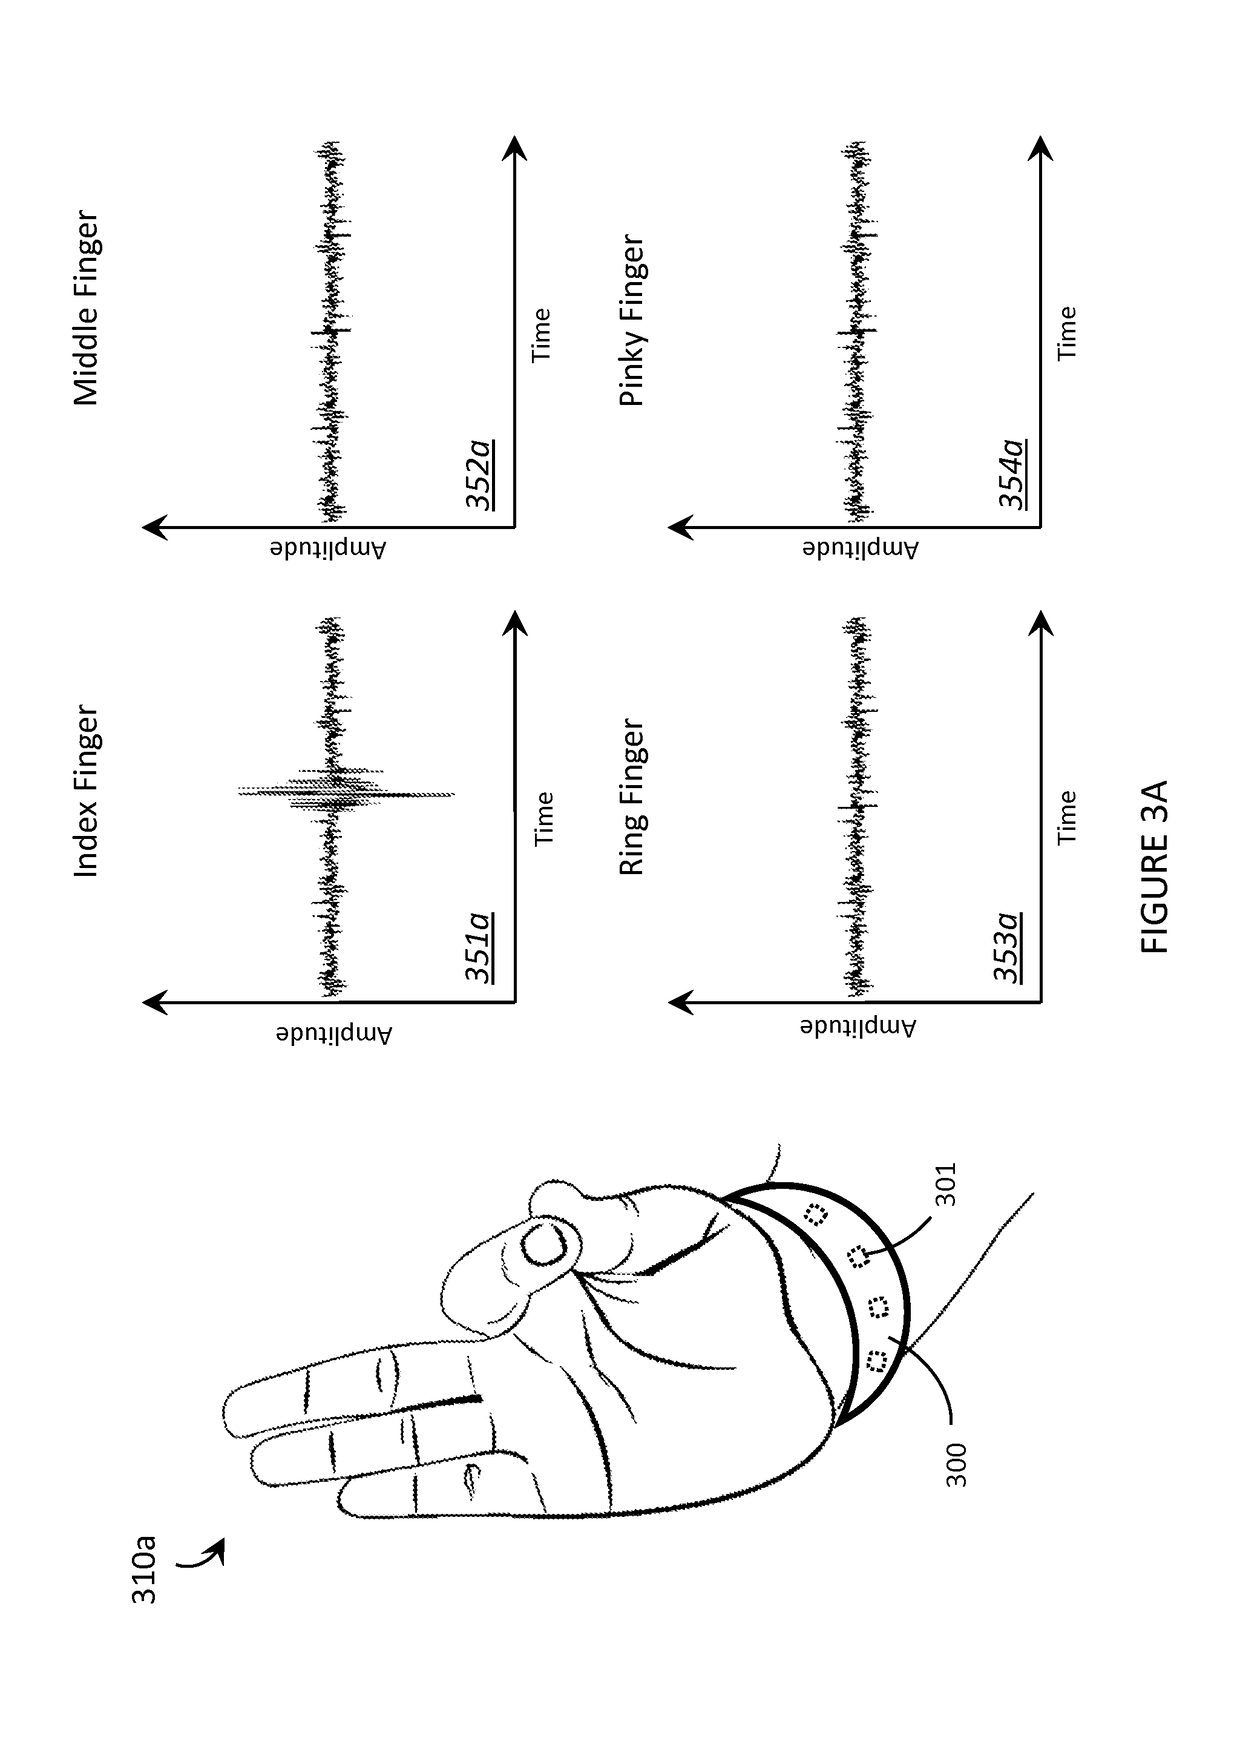 Systems, articles, and methods for wearable human-electronics interface devices